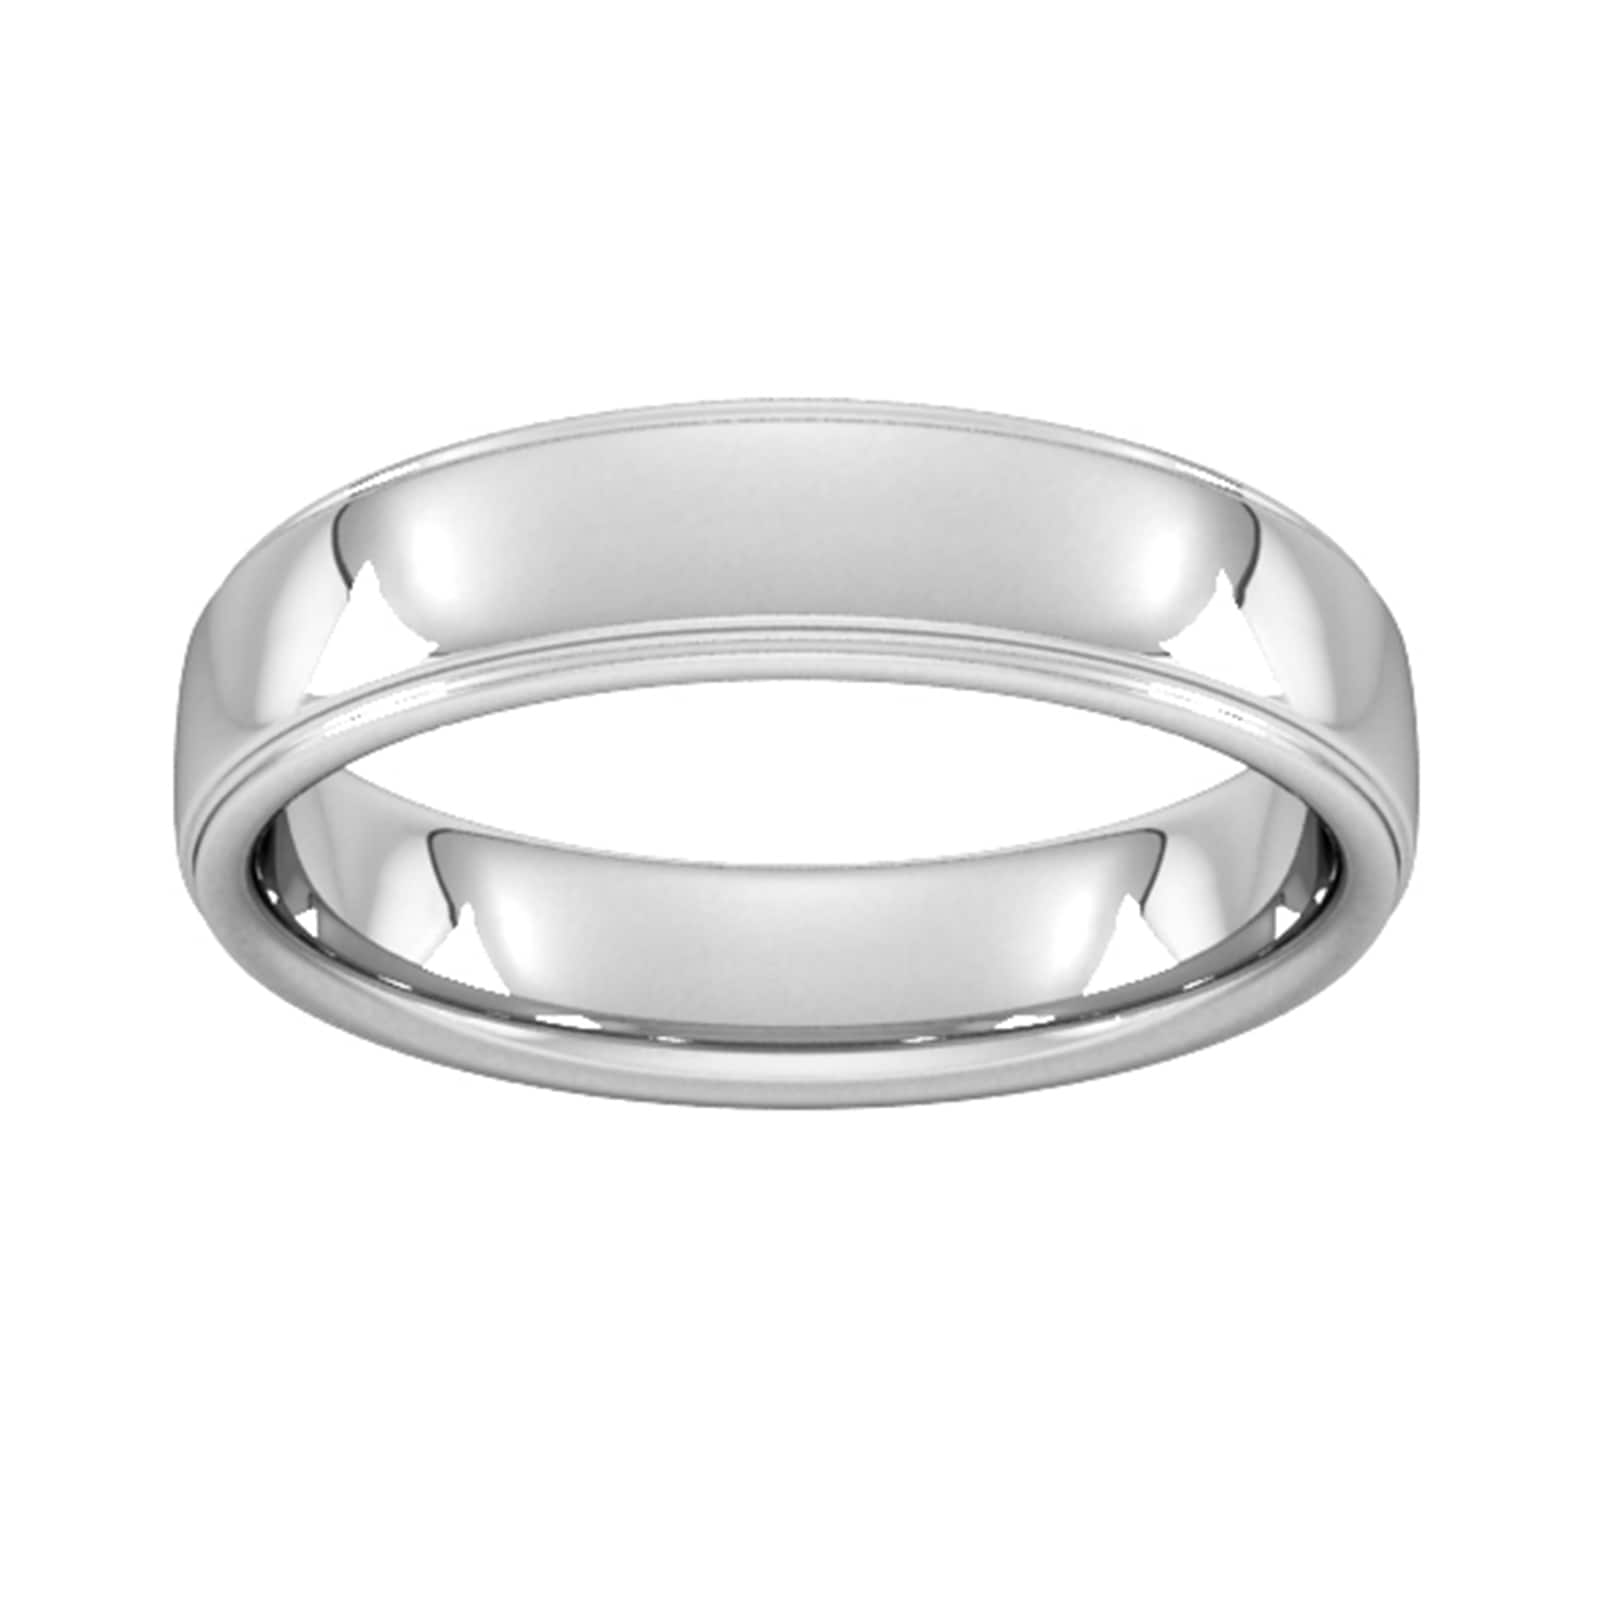 5mm Slight Court Heavy Polished Finish With Grooves Wedding Ring In 950 Palladium - Ring Size S